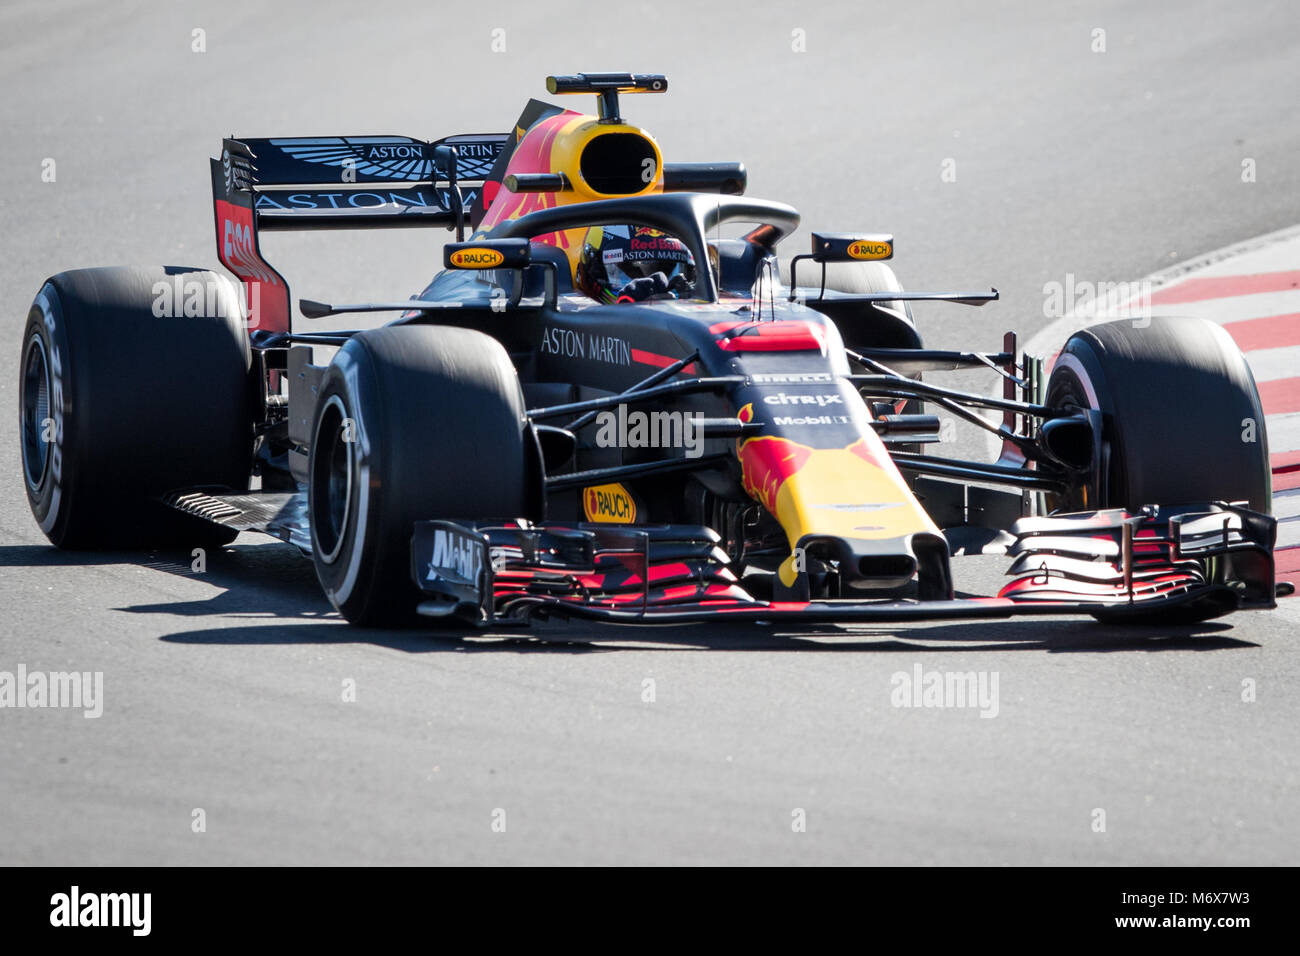 Montmelo, Catalonia, Spain. 7th Mar, 2018. Daniel Ricciardo of RedBull Racing team with Red Bull RB14 seen during F1 Test Days in Montmelo circuit. Credit:  MA 5756.jpg/SOPA Images/ZUMA Wire/Alamy Live News Stock Photo